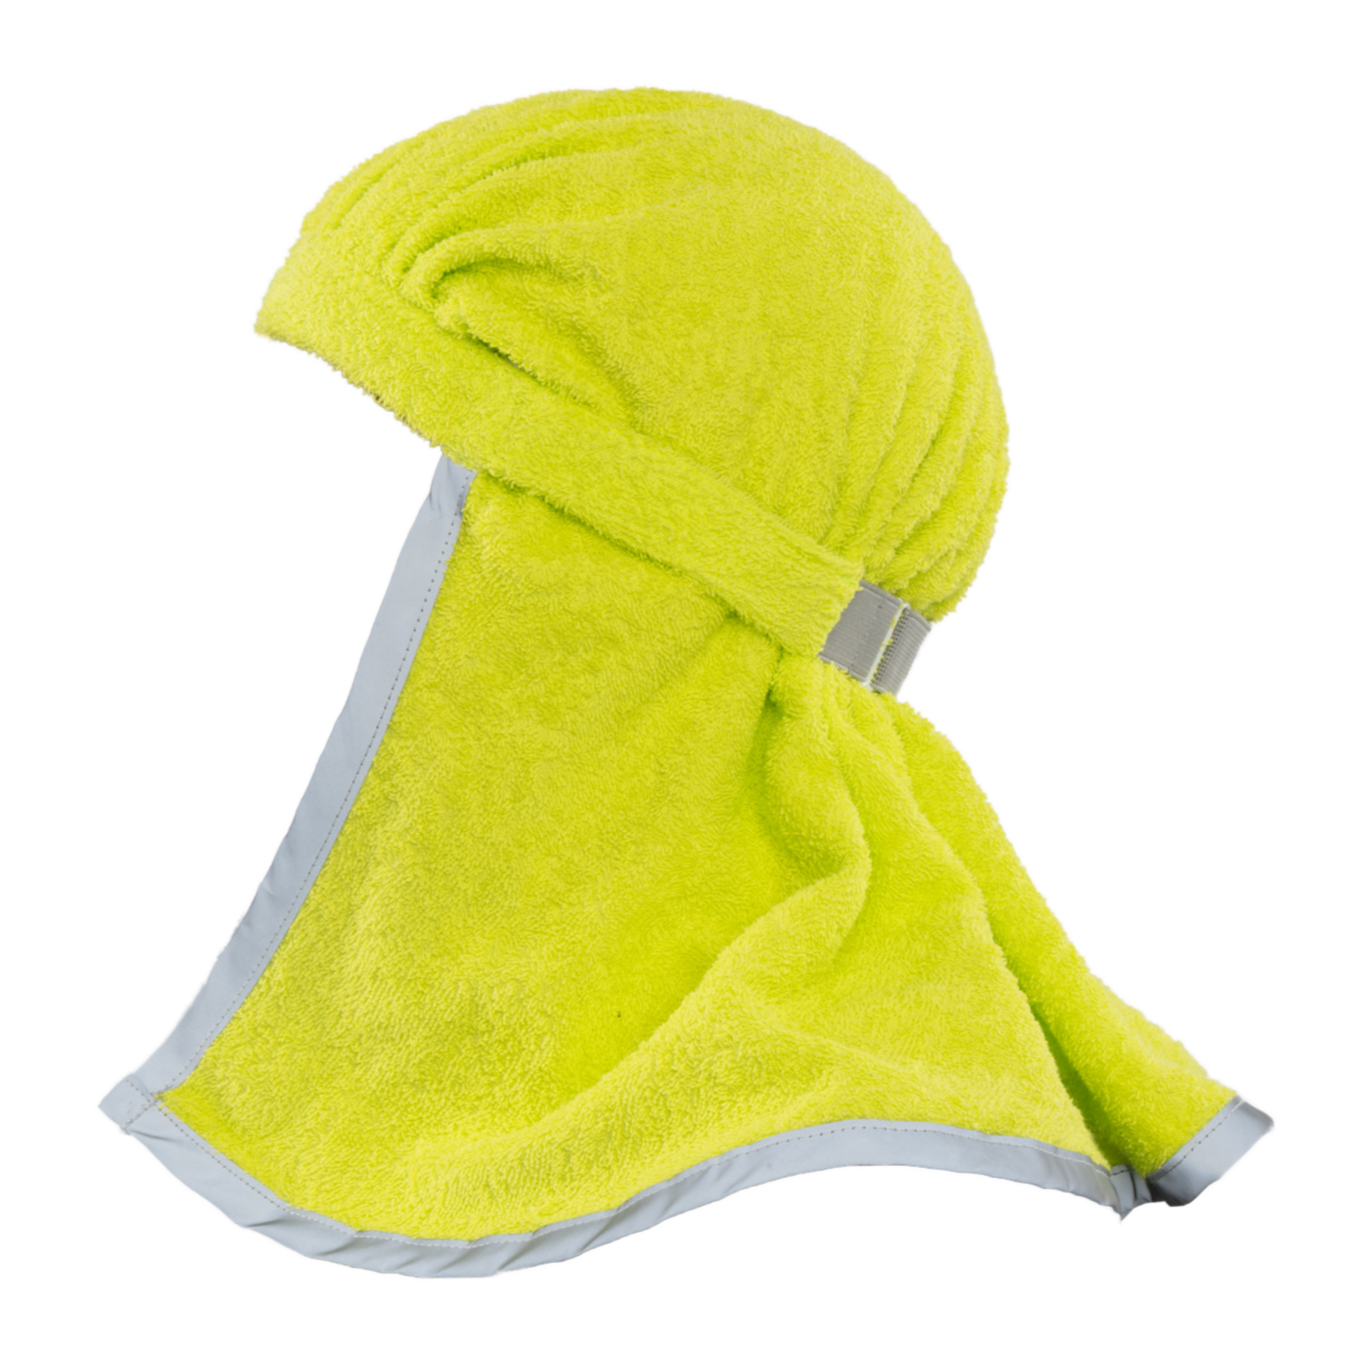 Polarheads PRO 3-in-1 Neck Shade, Sweatband and Cooling Towel - Safety Yellow/Reflective